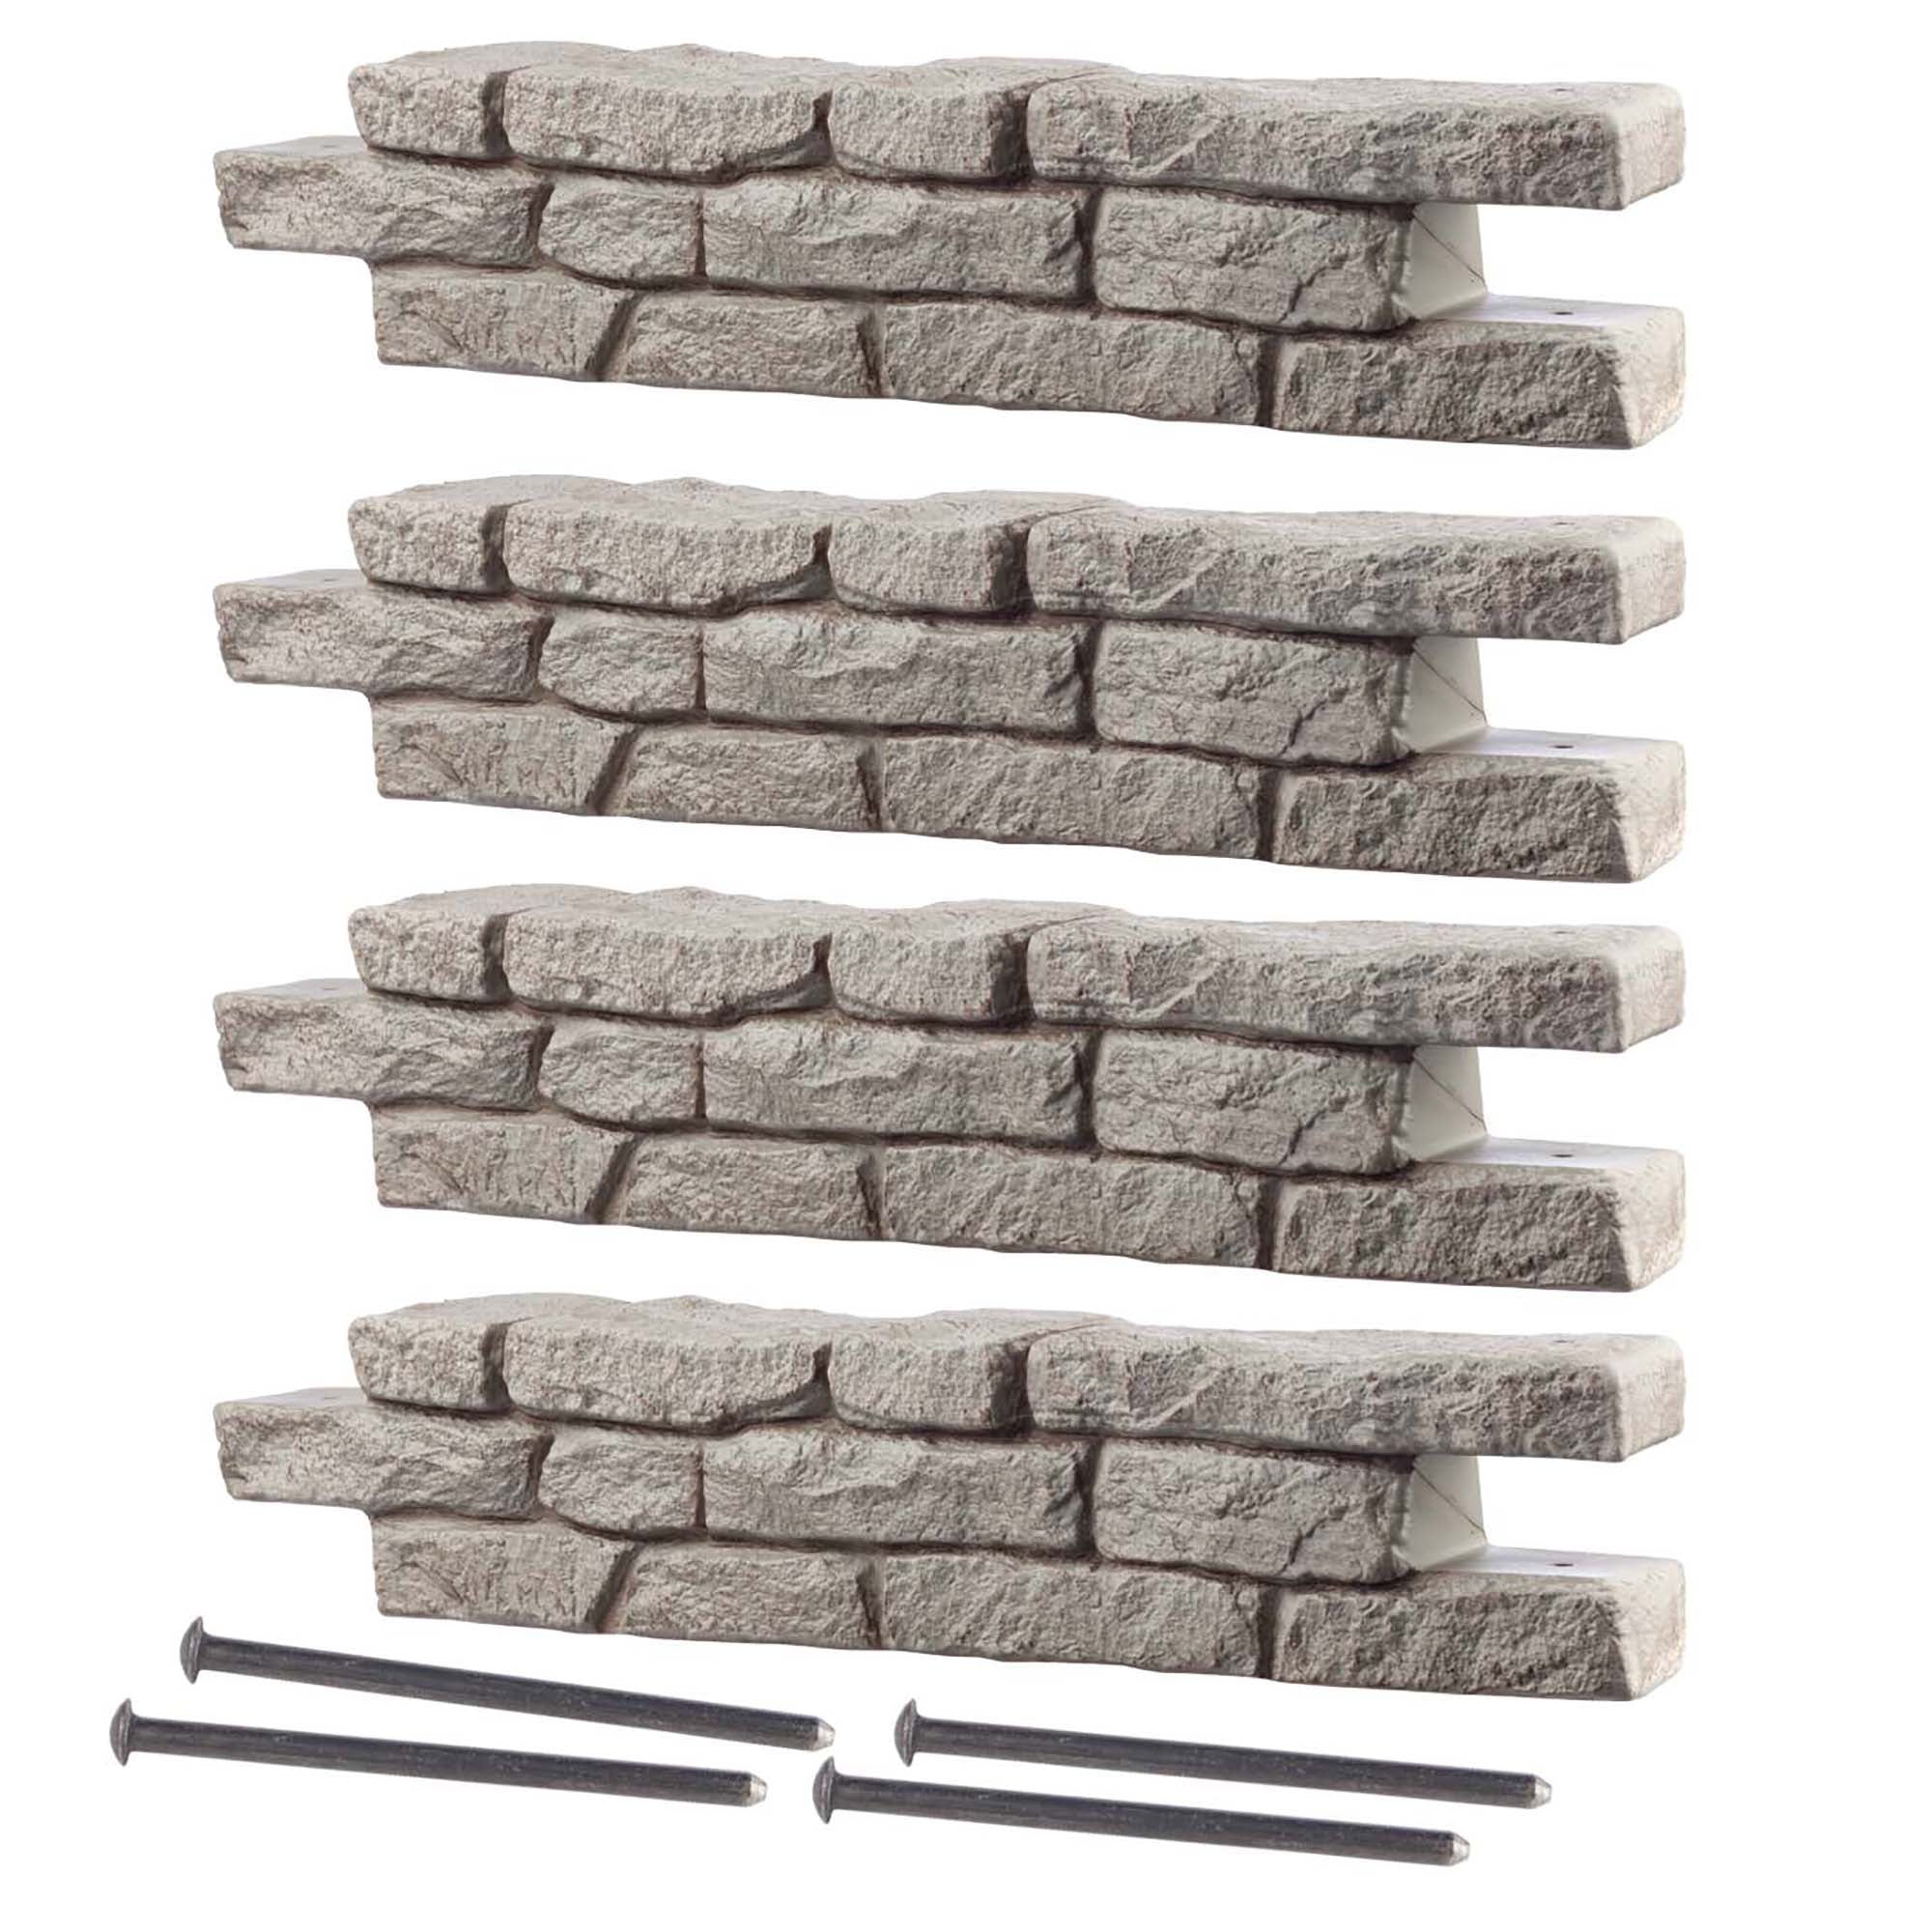 Four straight pieces of rock lock and four 18 inch spikes on a white background